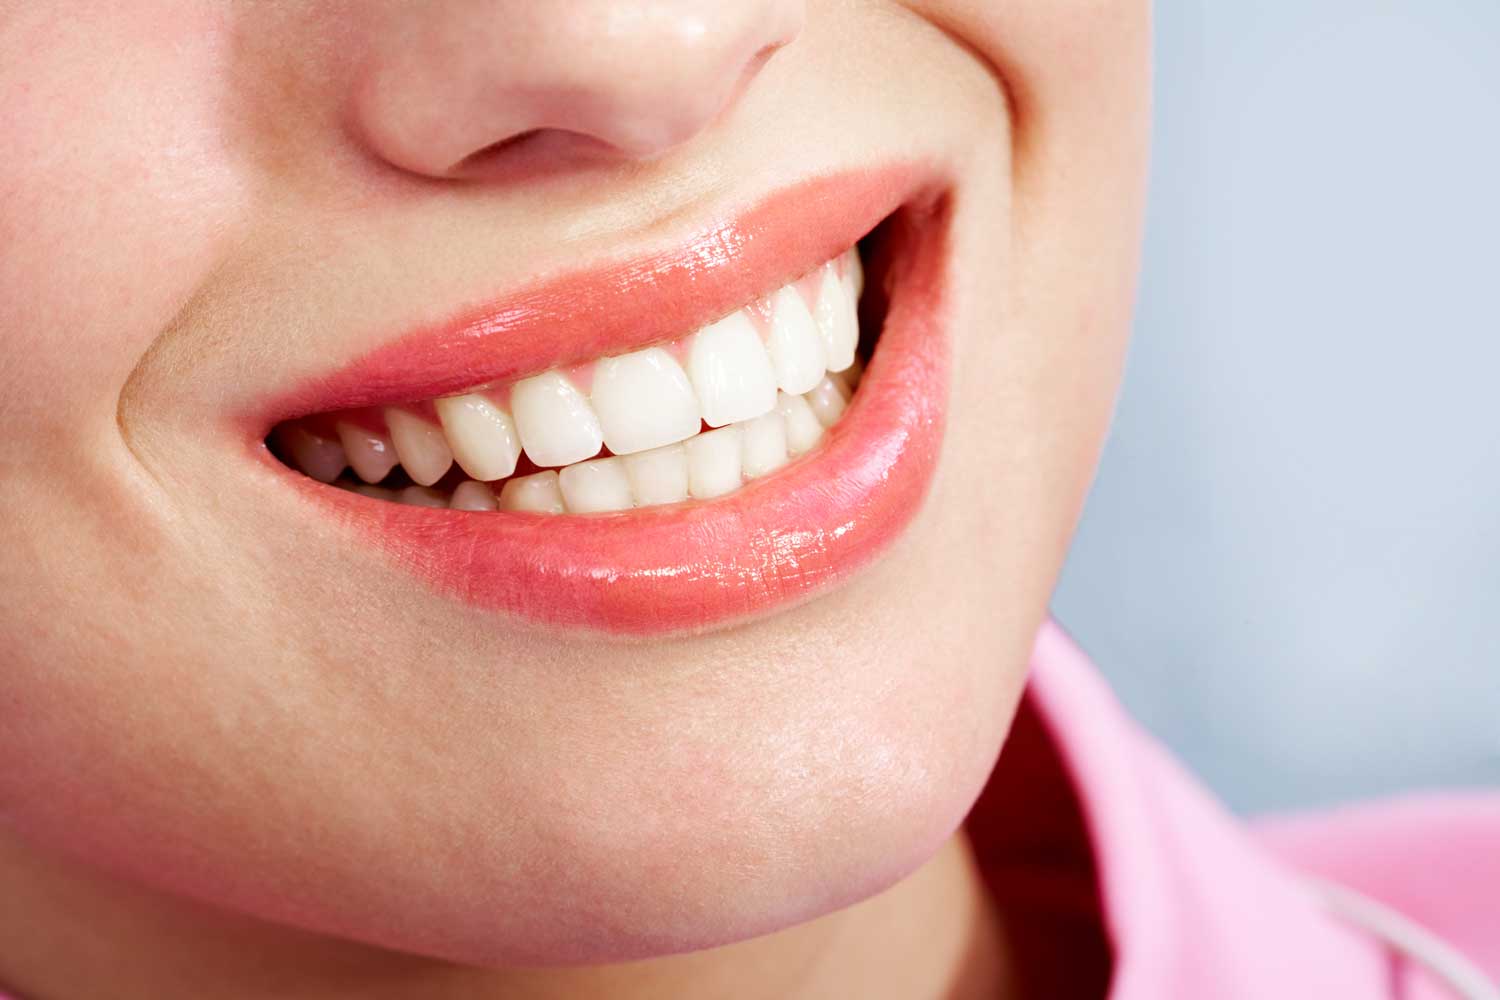 What are the different types of veneers according to Cosmetic Dentistry?